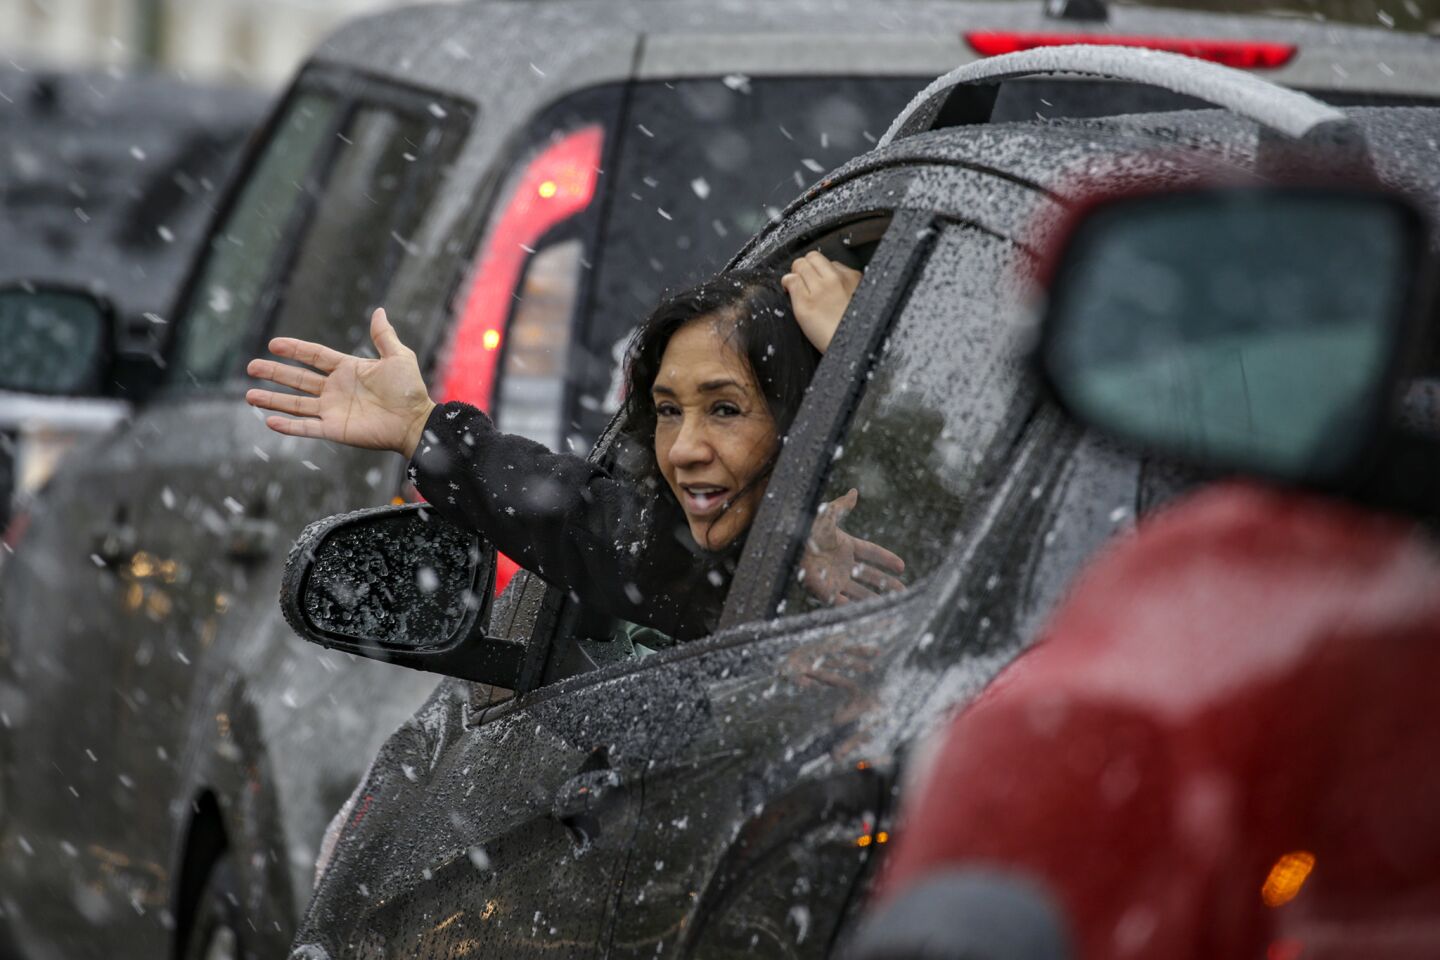 Liz Scales, 56, sticks her hand out to feel the falling snow in Rancho Cucamonga.